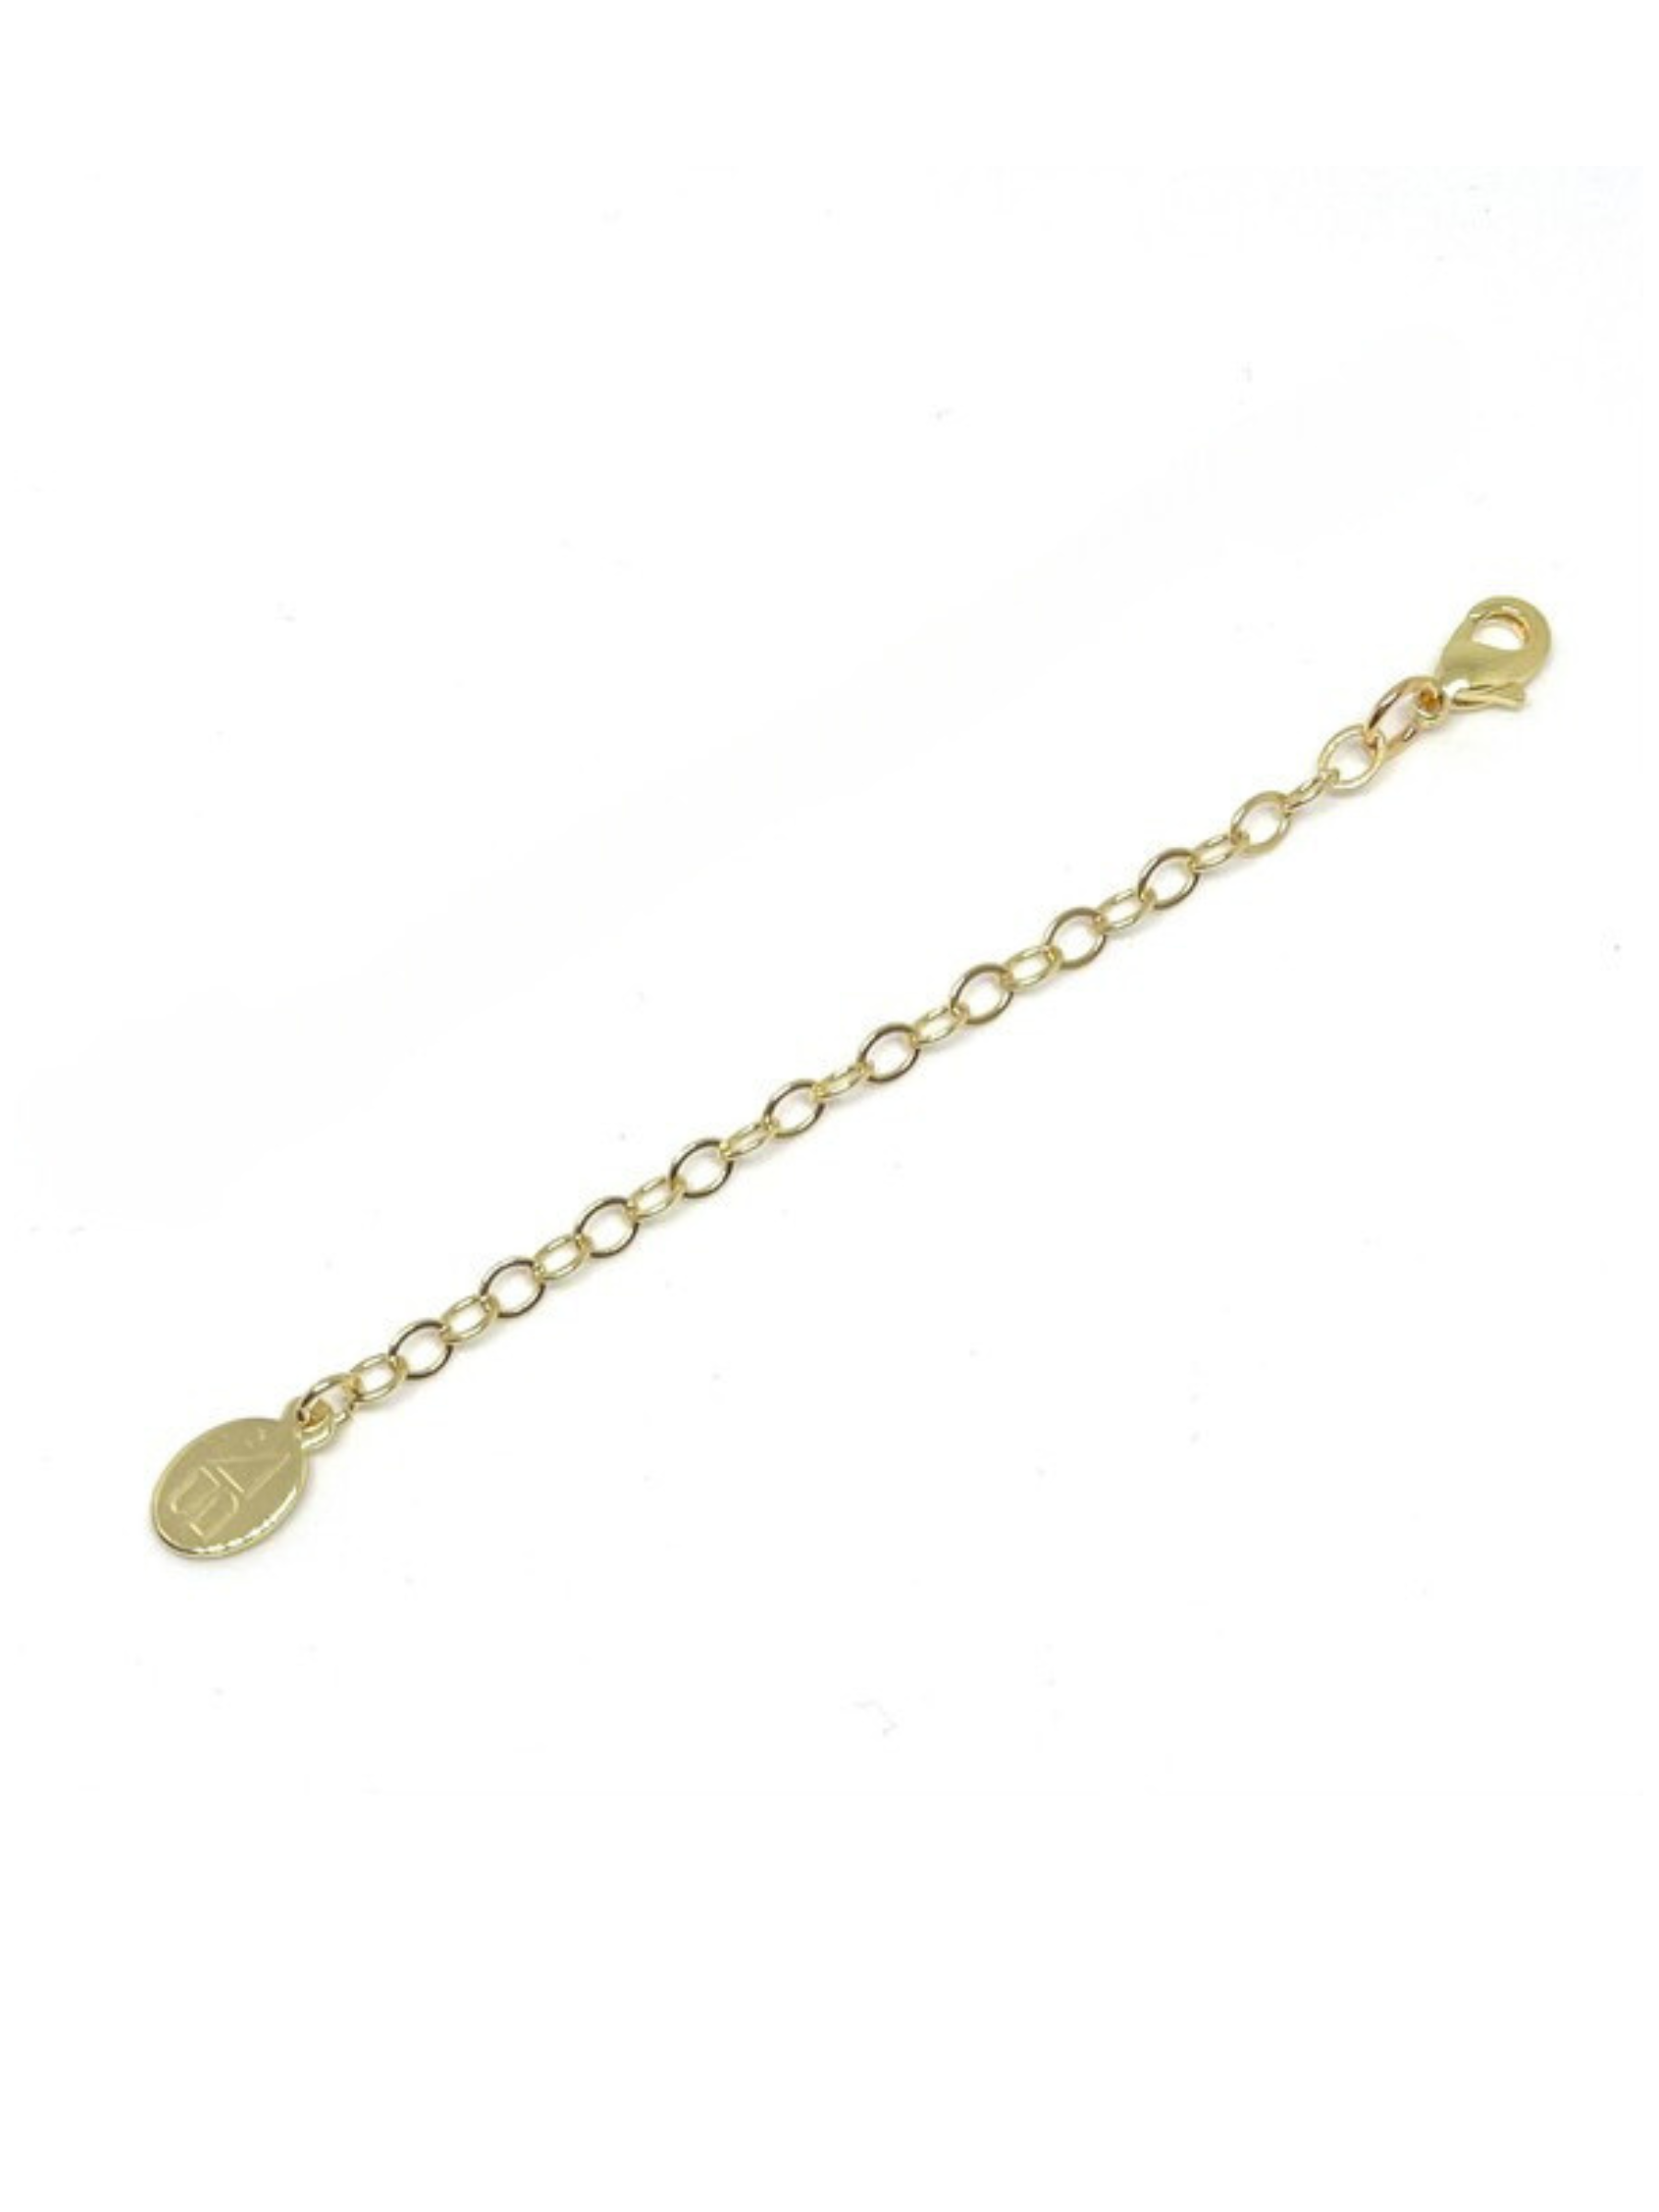 3 Inch Extender Chain- Gold